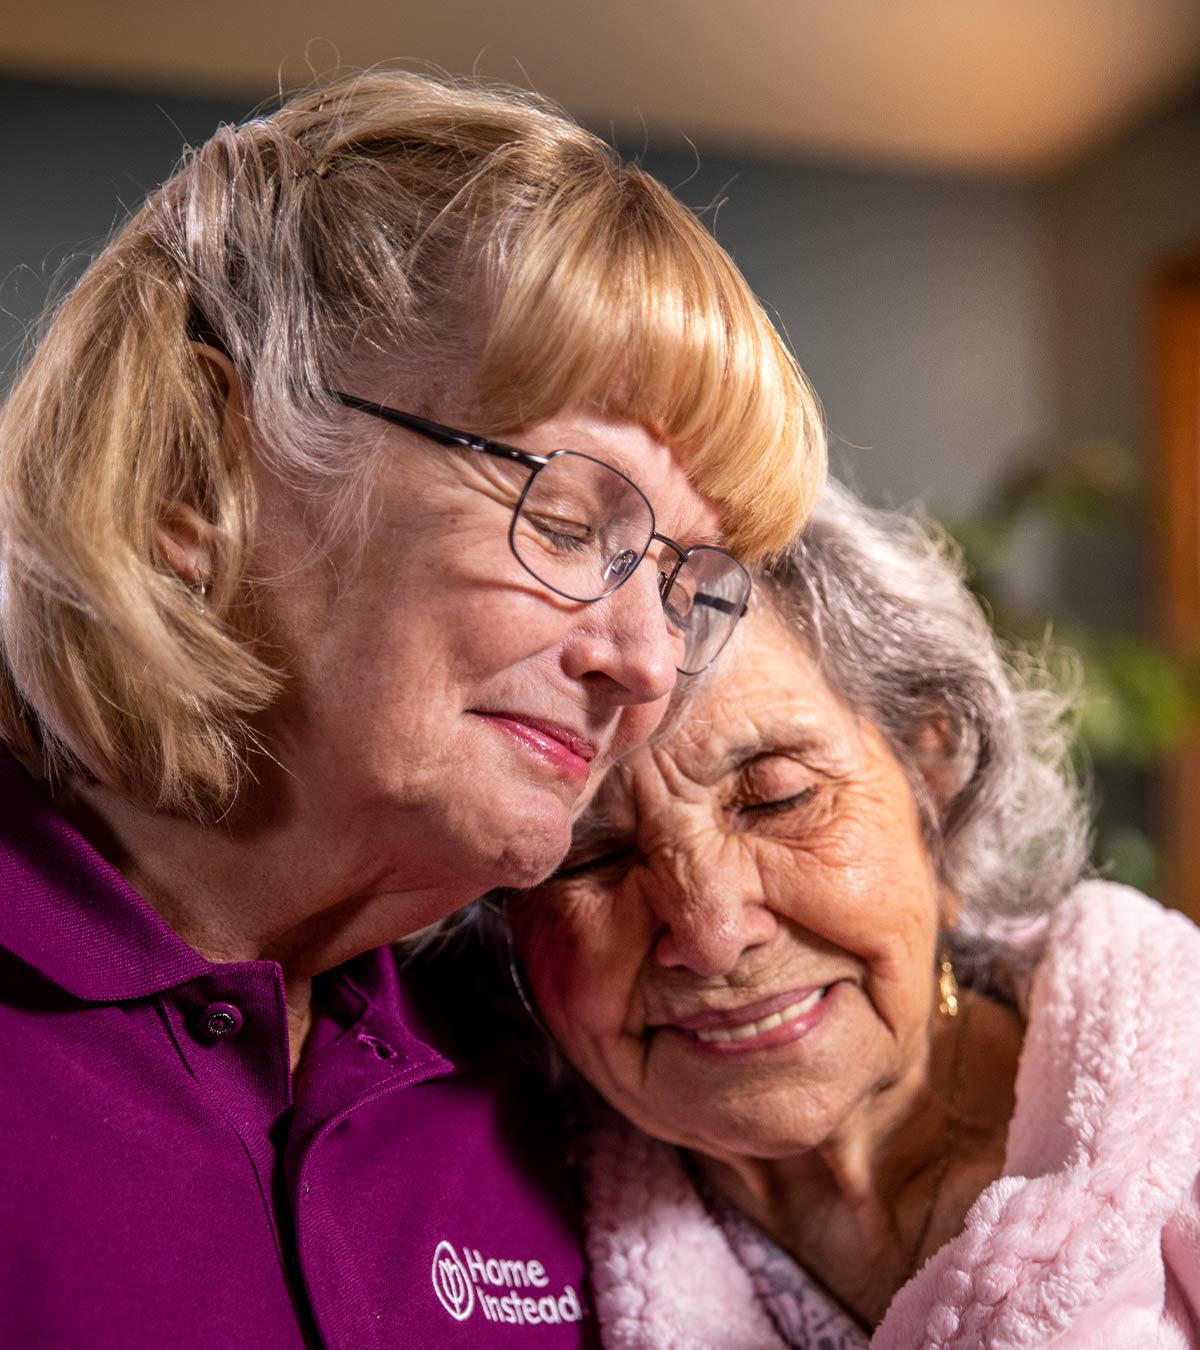 CAREGiver providing in-home senior care services. Home Instead of West Chester, OH provides Elder Care to aging adults. 